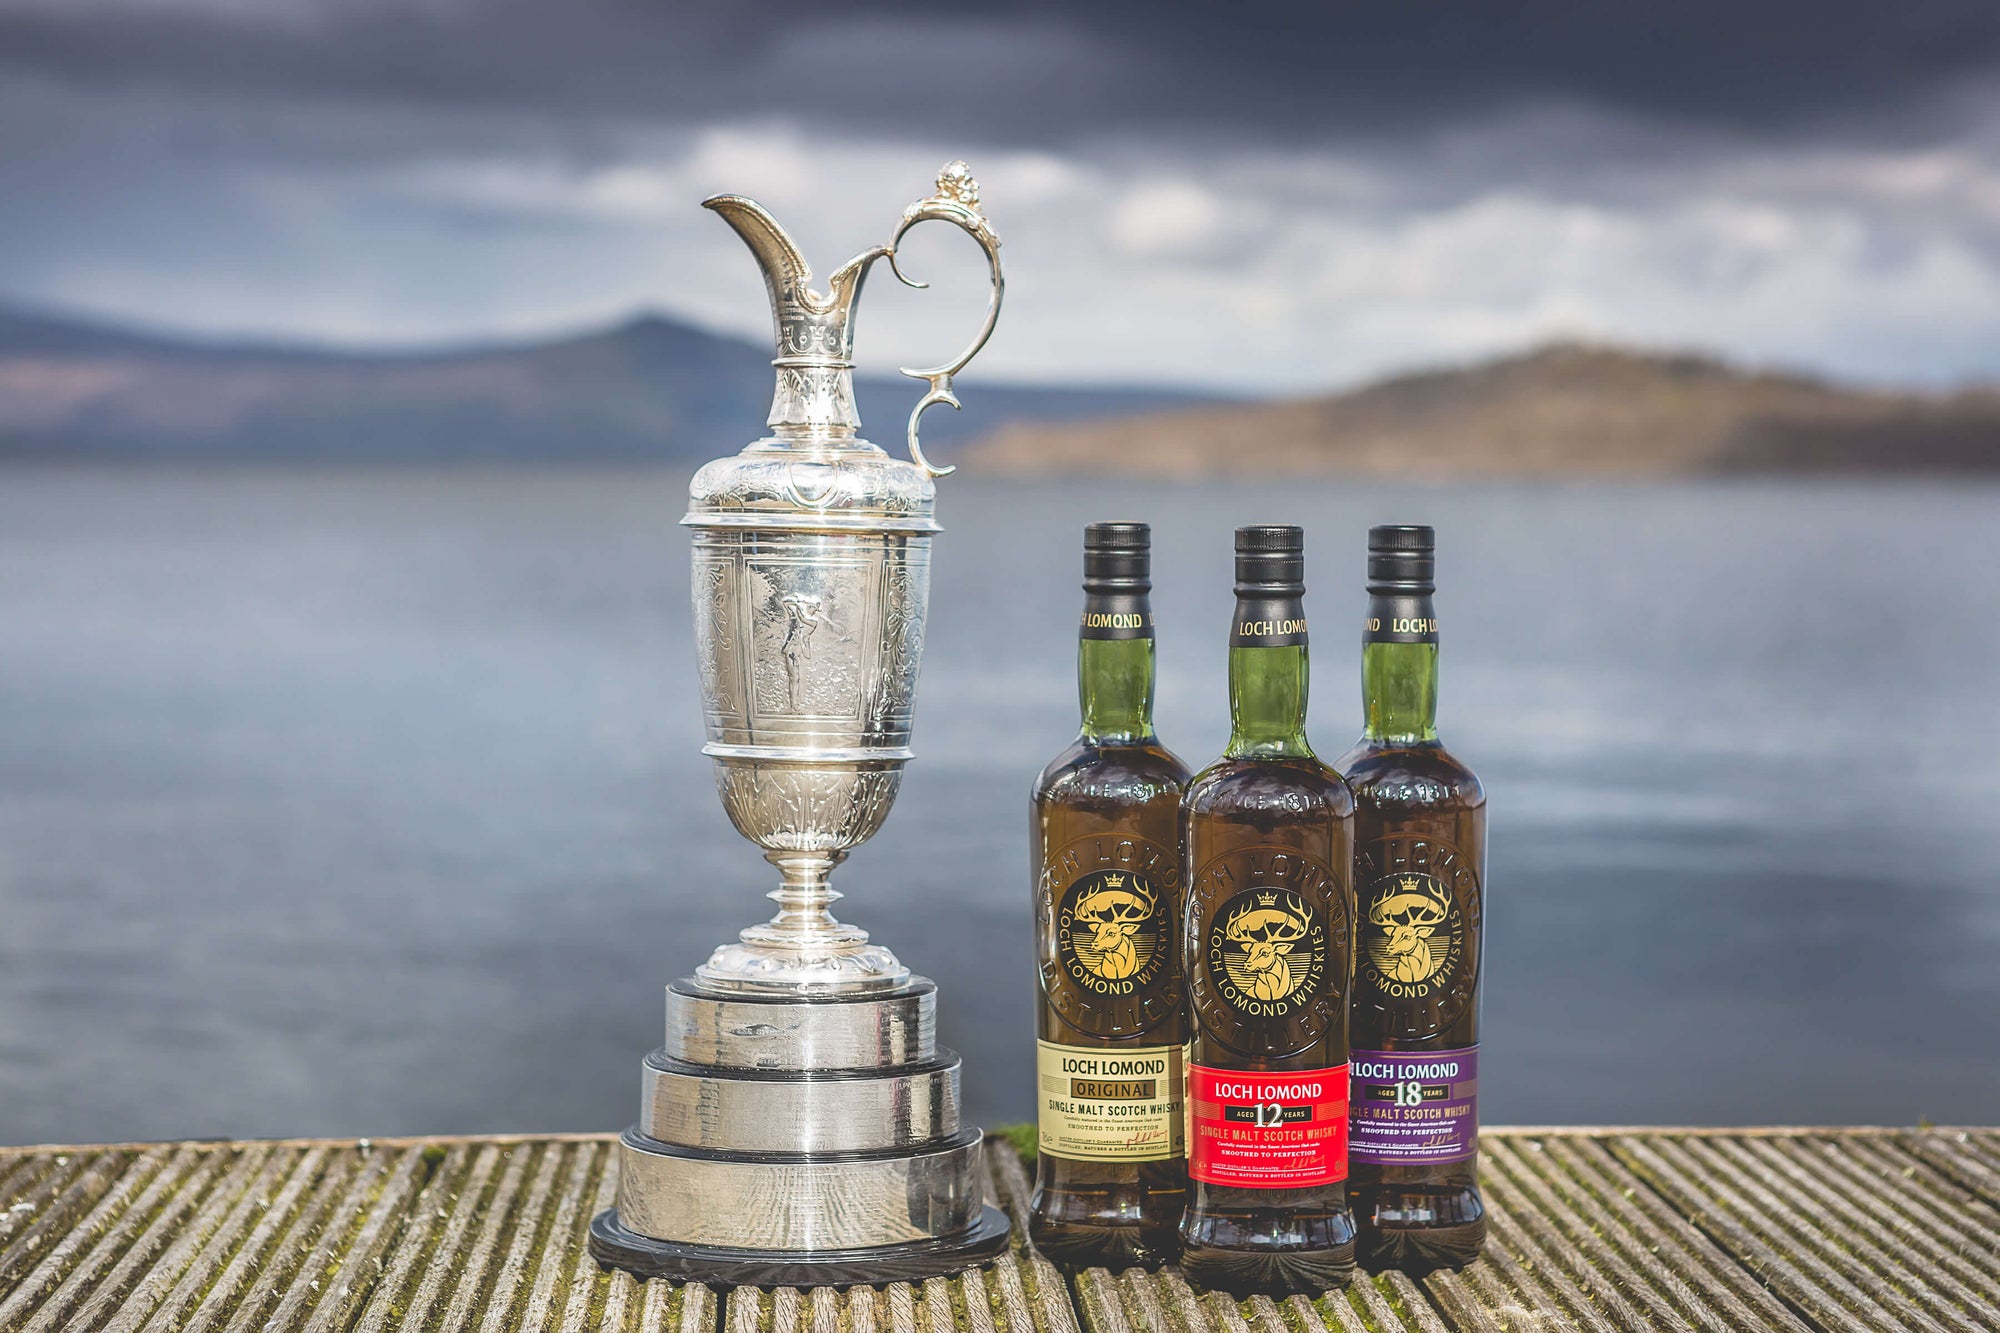 Loch Lomond Whiskies and The Open